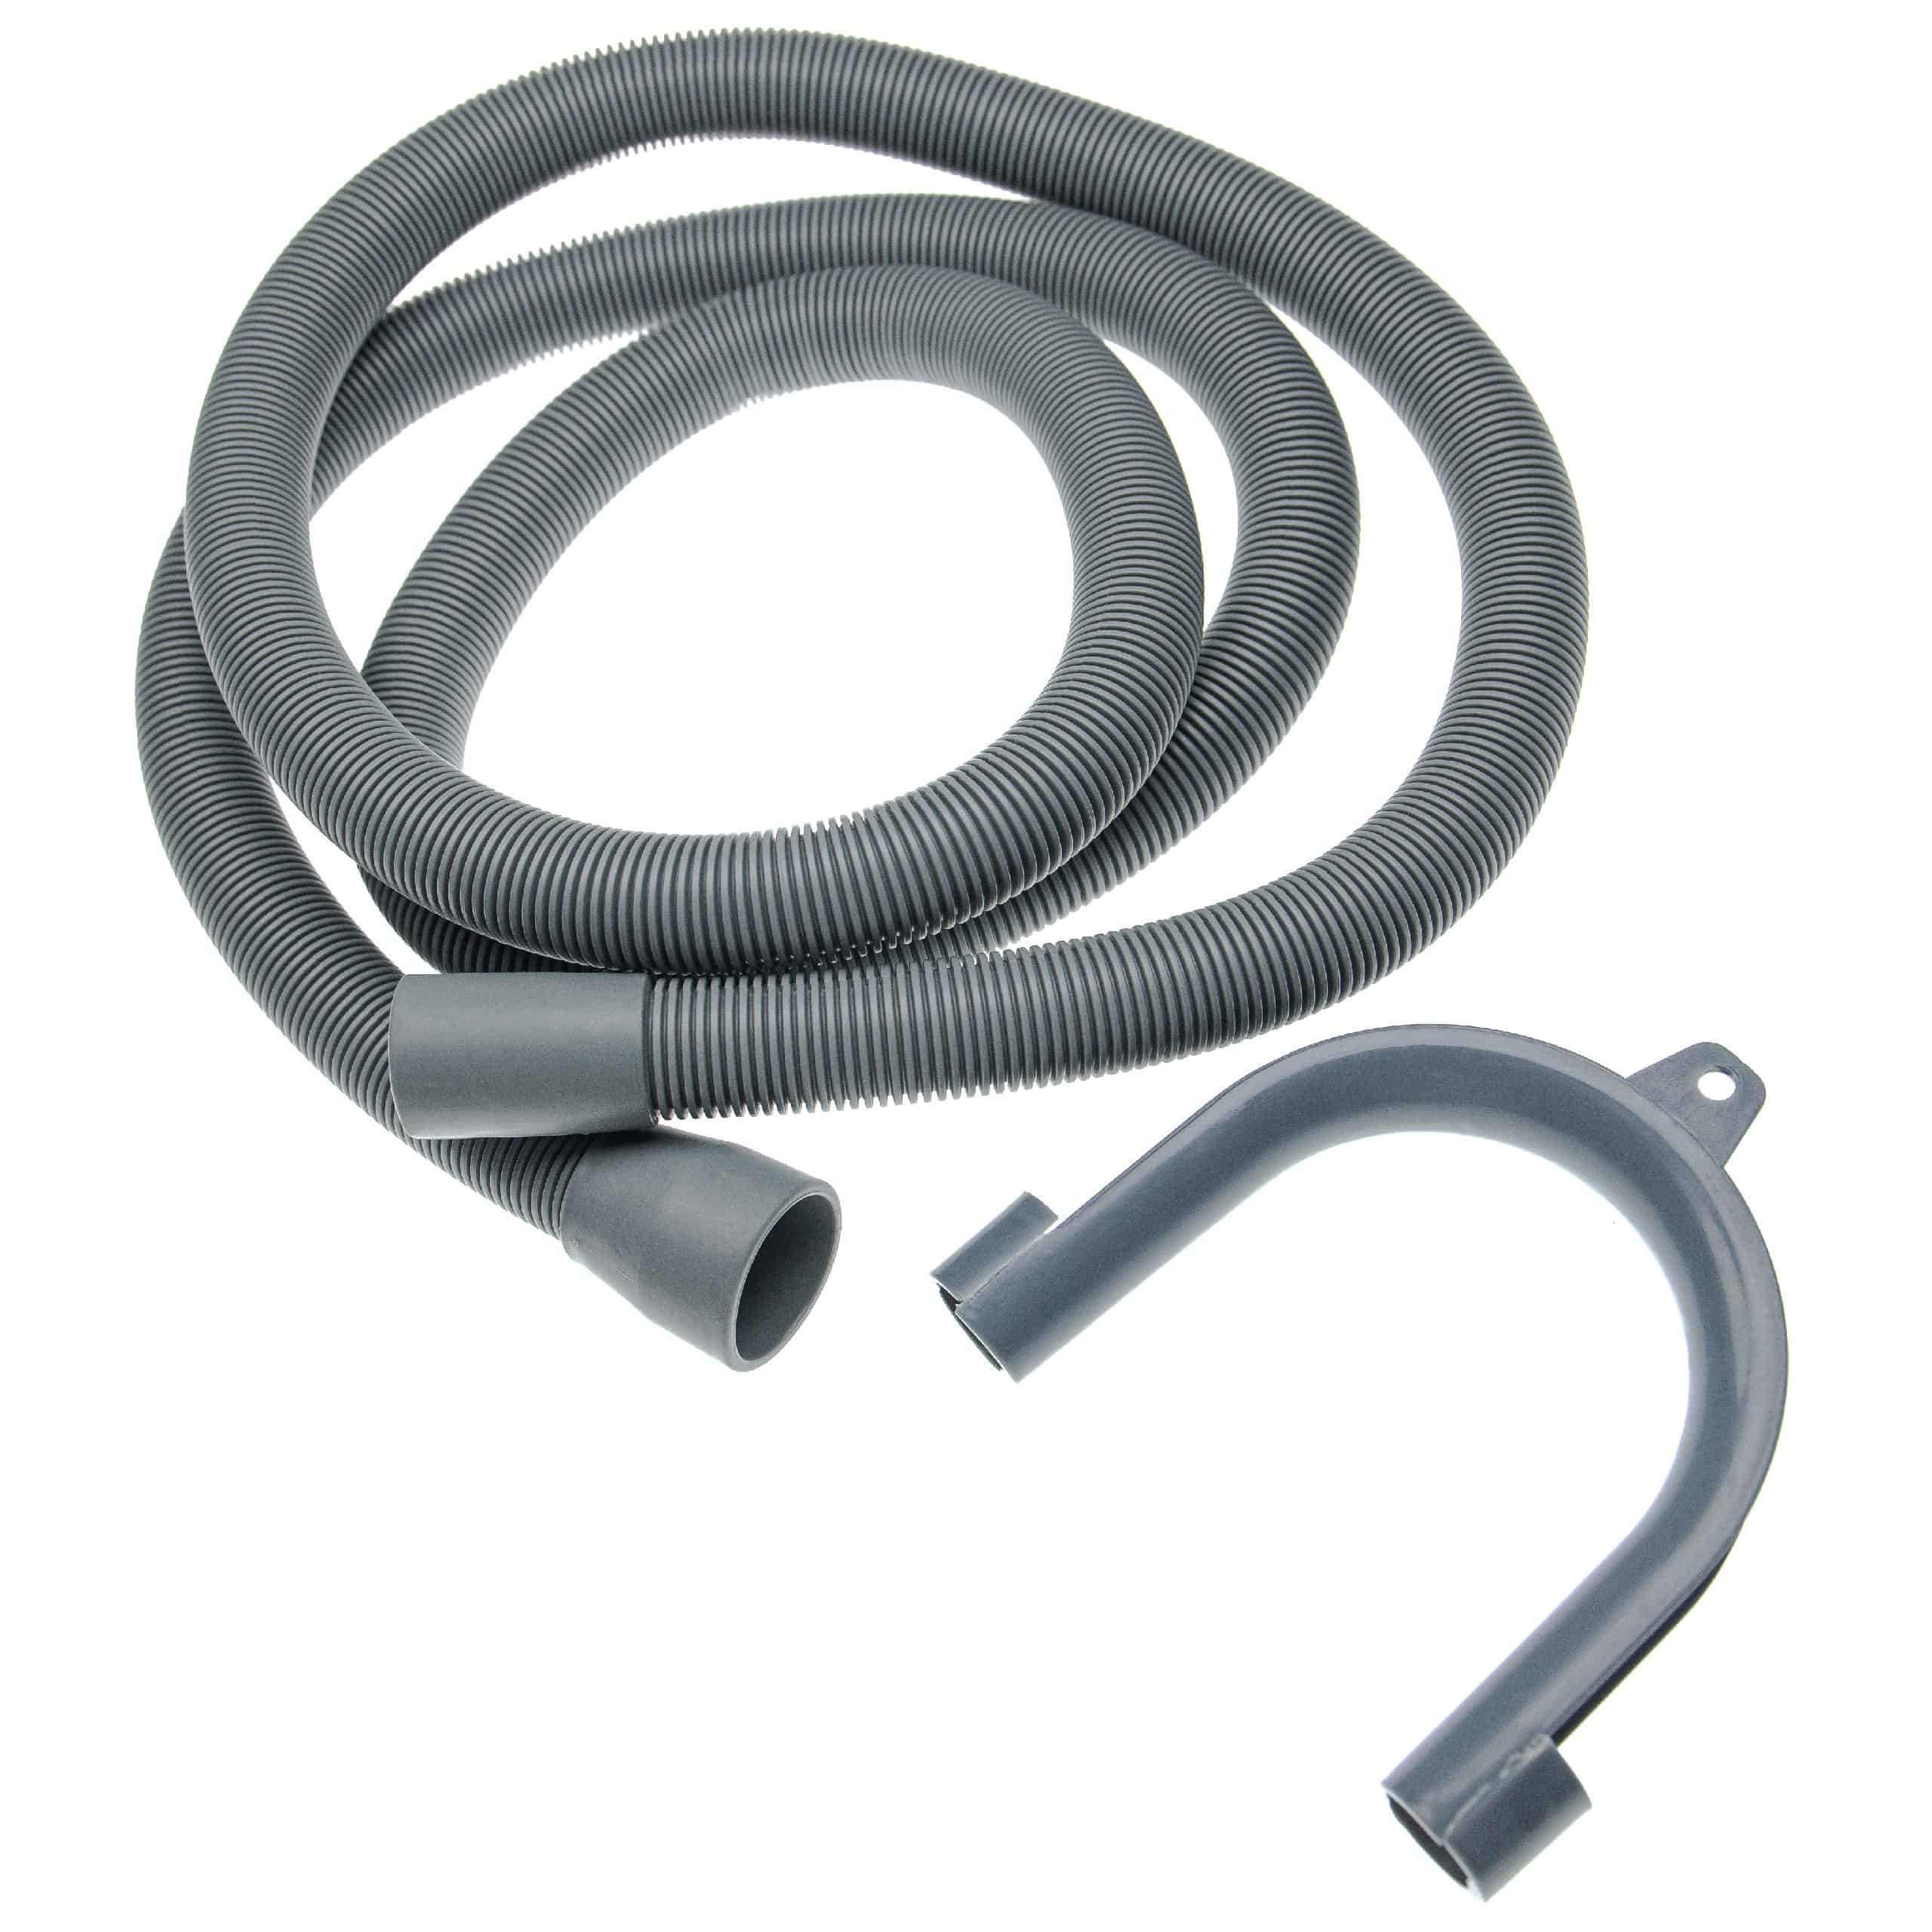 Drain Hose compatible with most Washing Machines - 22/29mm Straight Connection, Grey